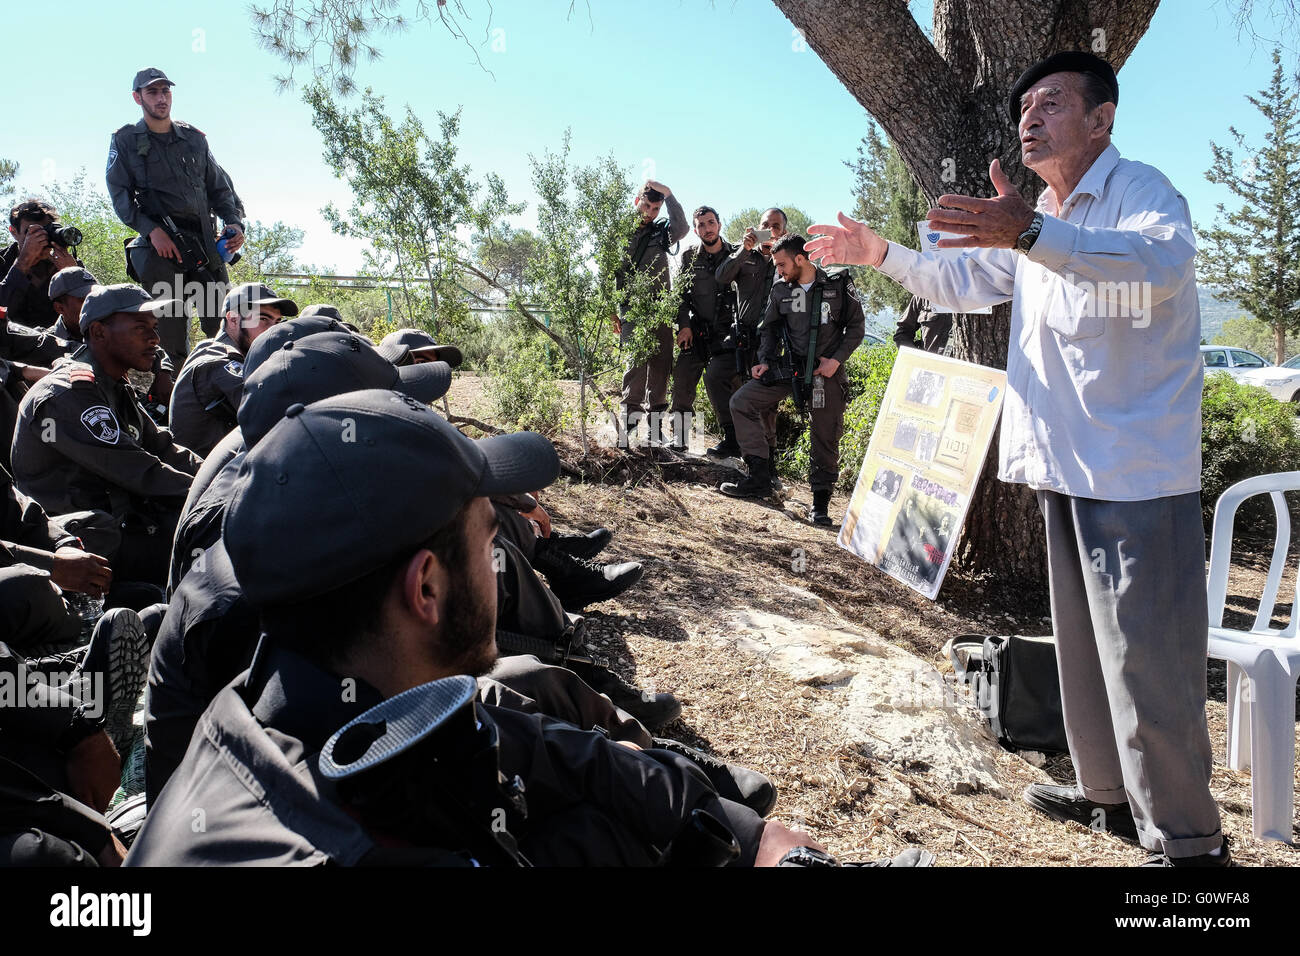 Kisalon, Israel. 5th May, 2016. German born Holocaust survivor ELIEZER LEV ZION, 91, briefs Border Patrol basic training cadets on his experiences in the French Resistance on Holocaust Martyrs' and Heroes' Remembrance Day. The B’nai B’rith World Center and Keren Kayemeth LeIsrael (KKL-JNF) held a Holocaust commemoration ceremony on Yom Hashoah dedicated to commemorating the heroism of Jews who rescued fellow Jews during the years of torment in Europe. Credit:  Nir Alon/Alamy Live News Stock Photo